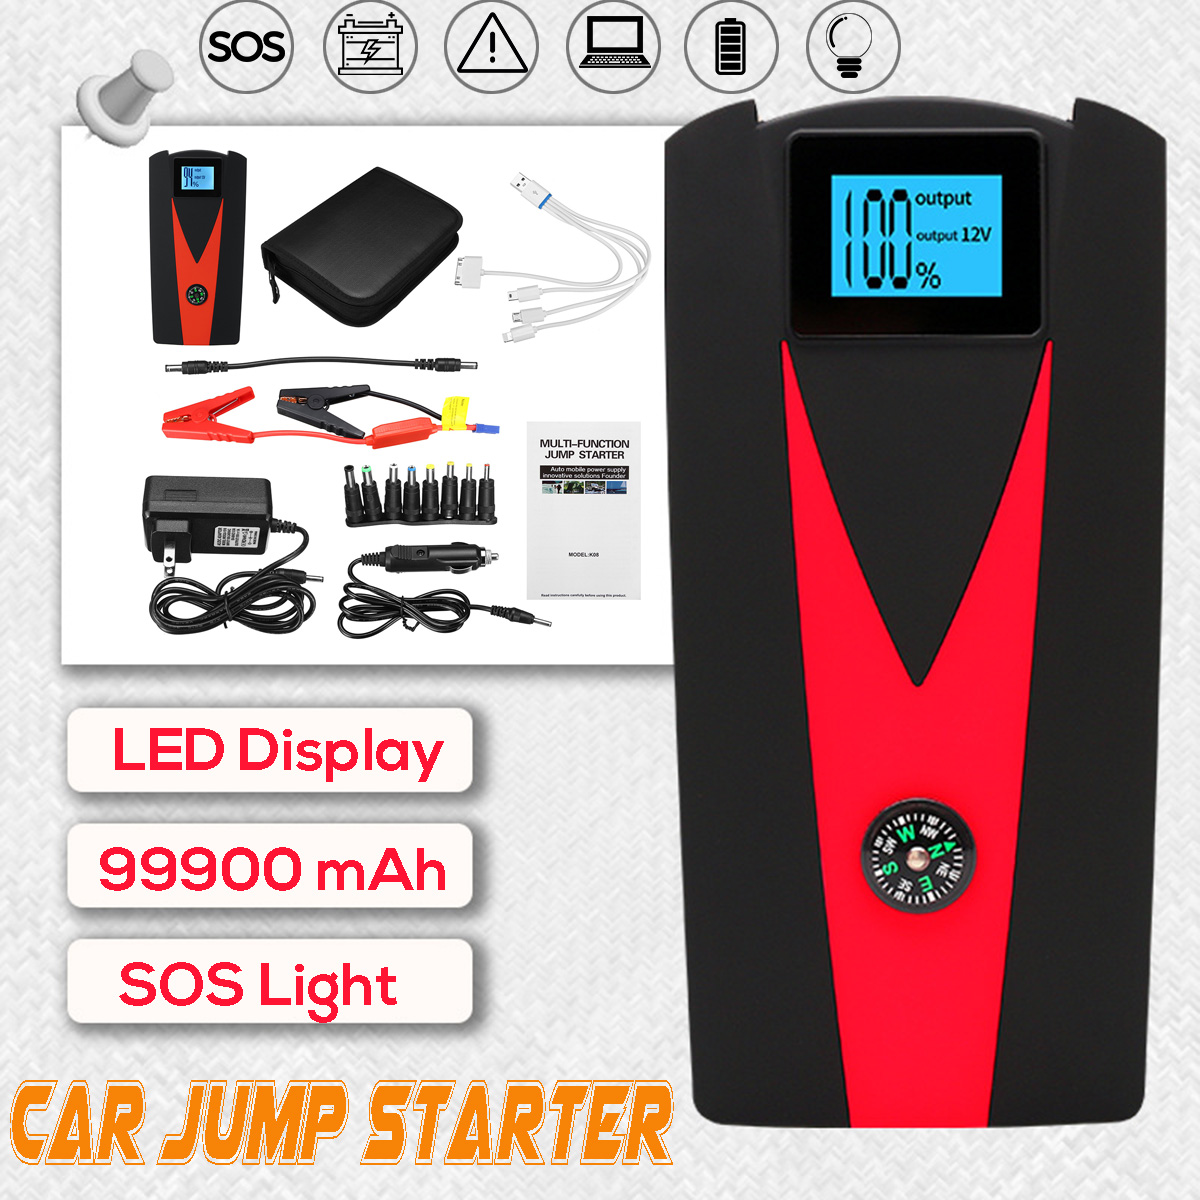 99900-mAh-Dual-USB-Car-Jump-Starter-LCD-Auto-Battery-Booster-Portable-Power-Pack-with-Jumper-Cables-1421905-3